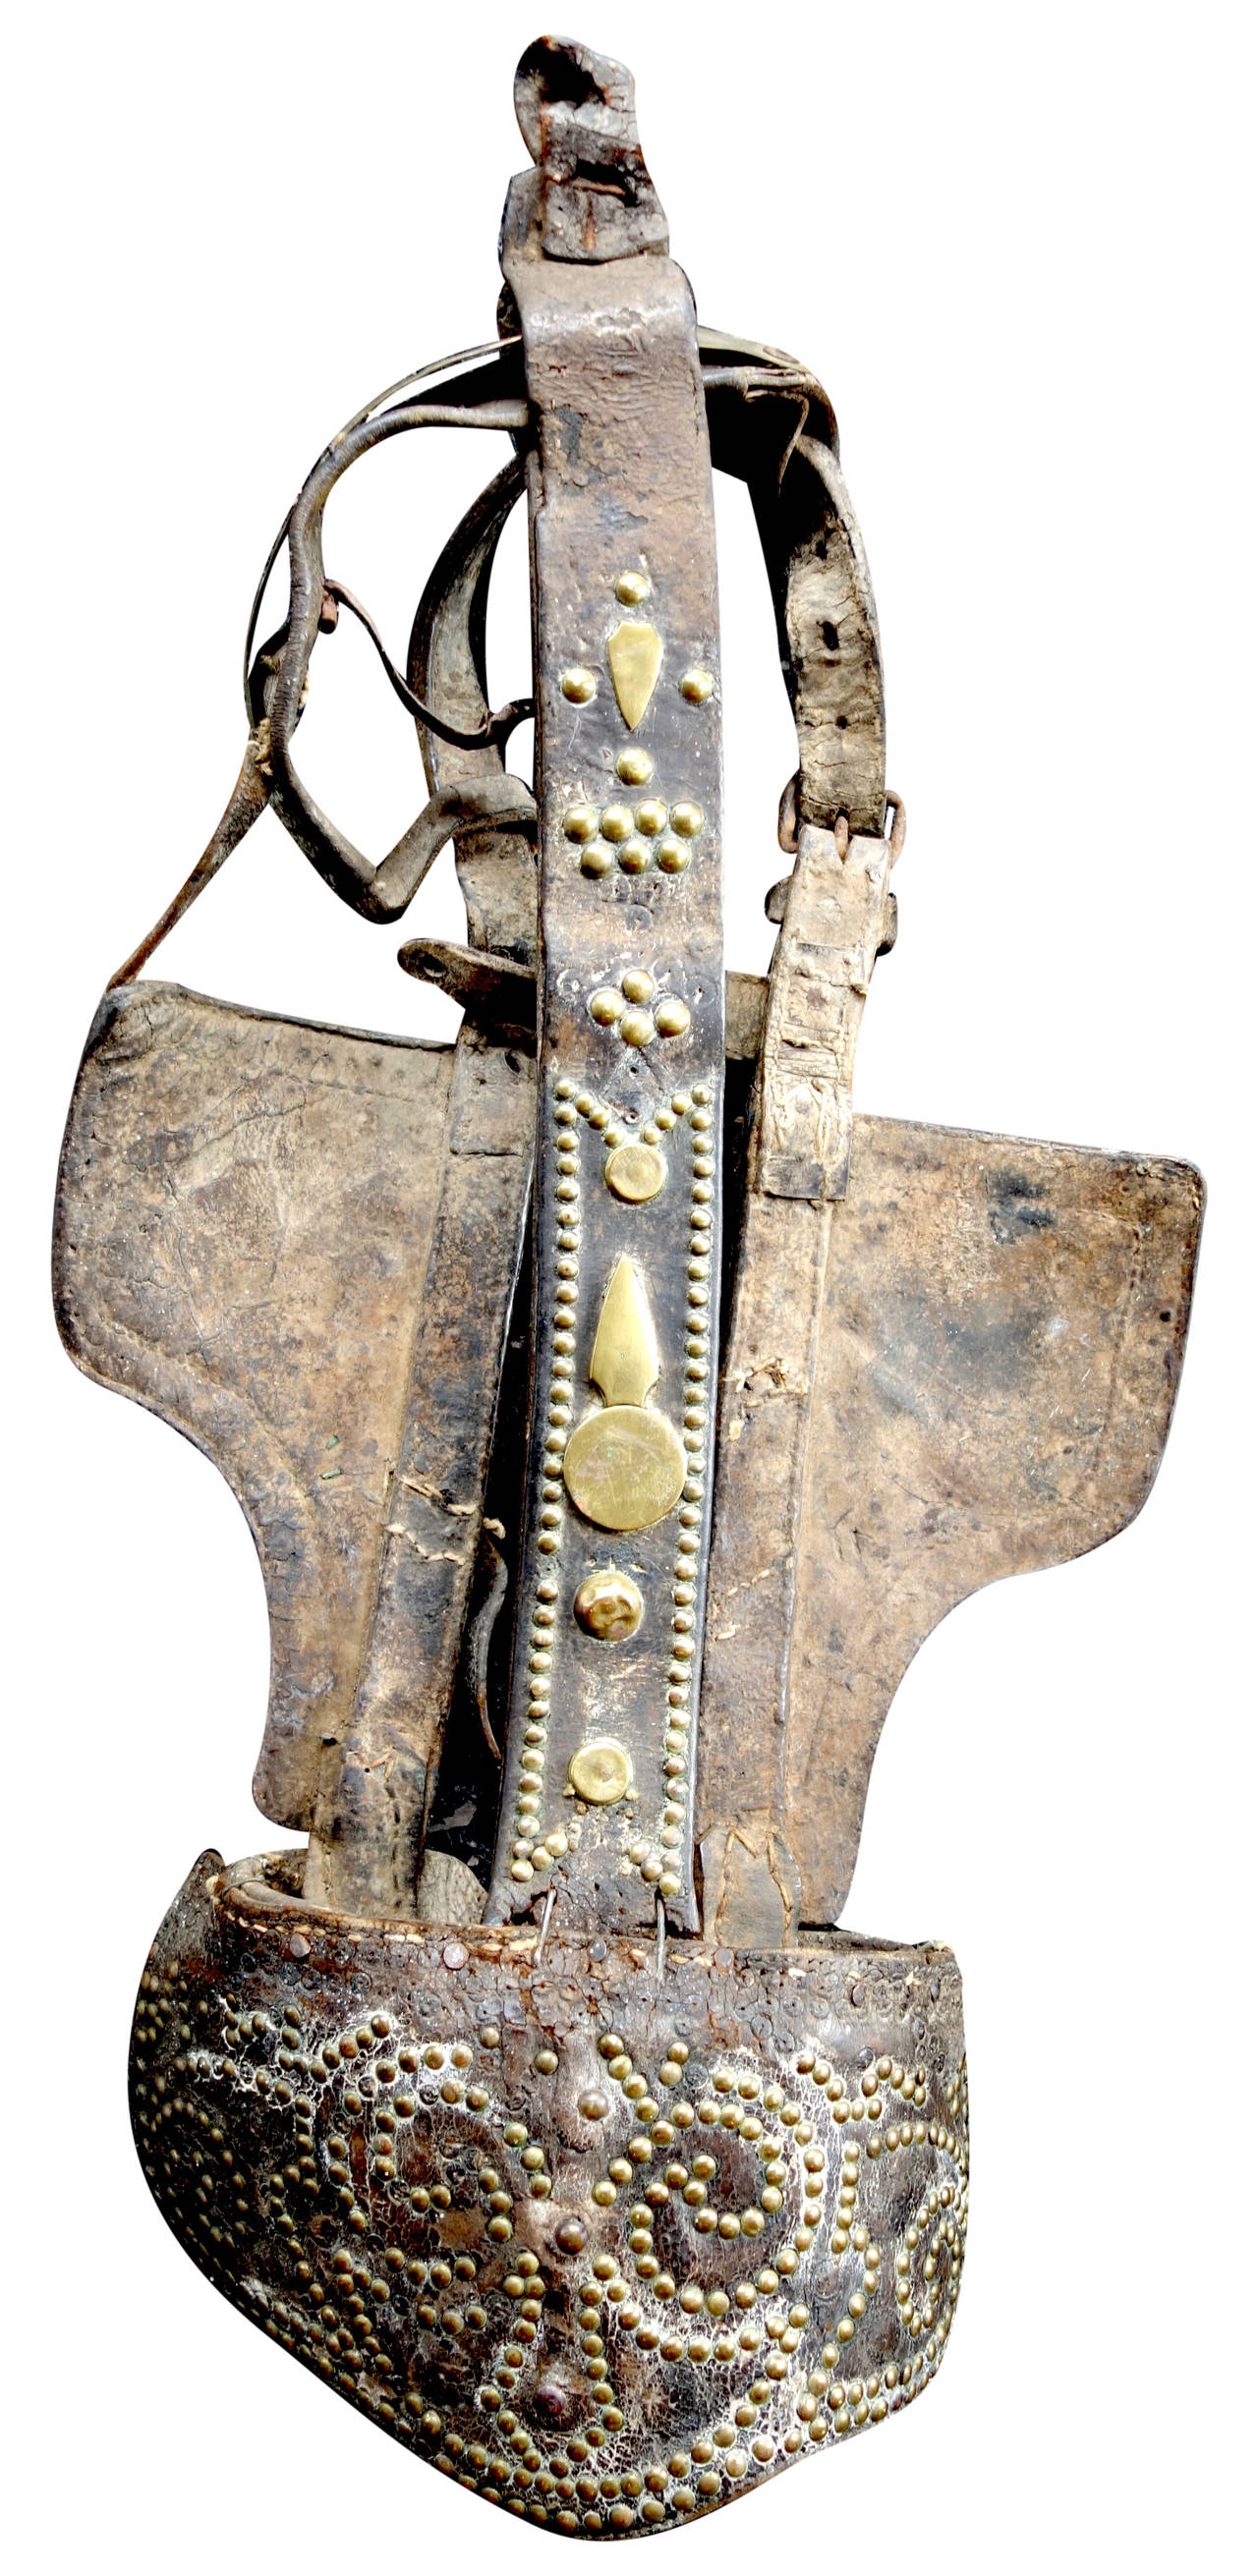 Great early horse bridle leather and brass rivet design. Featuring the initials "CL."